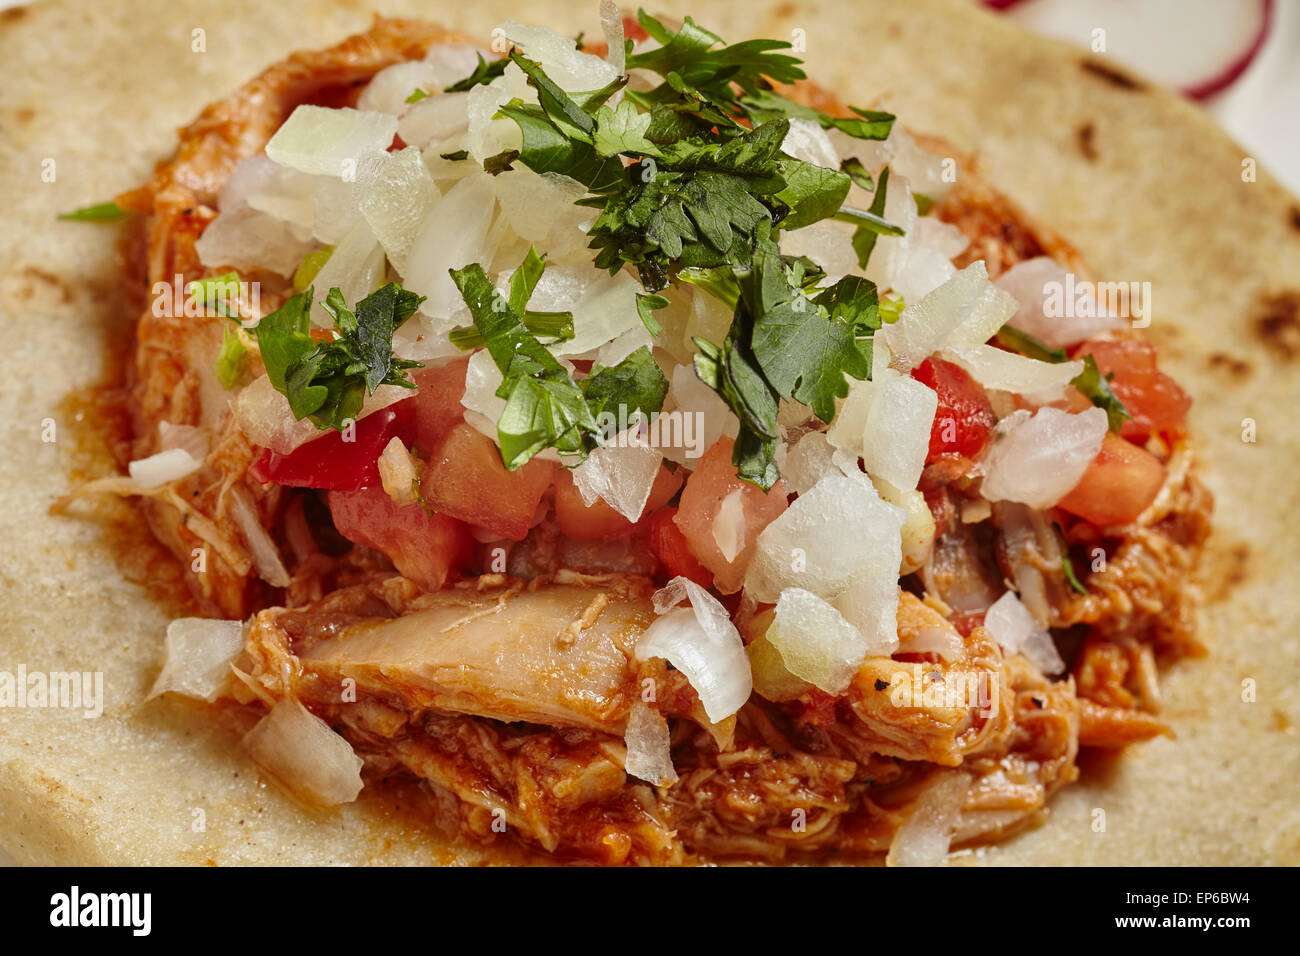 Chicken Sope, Mexican snack dish on a thick tortilla Stock Photo